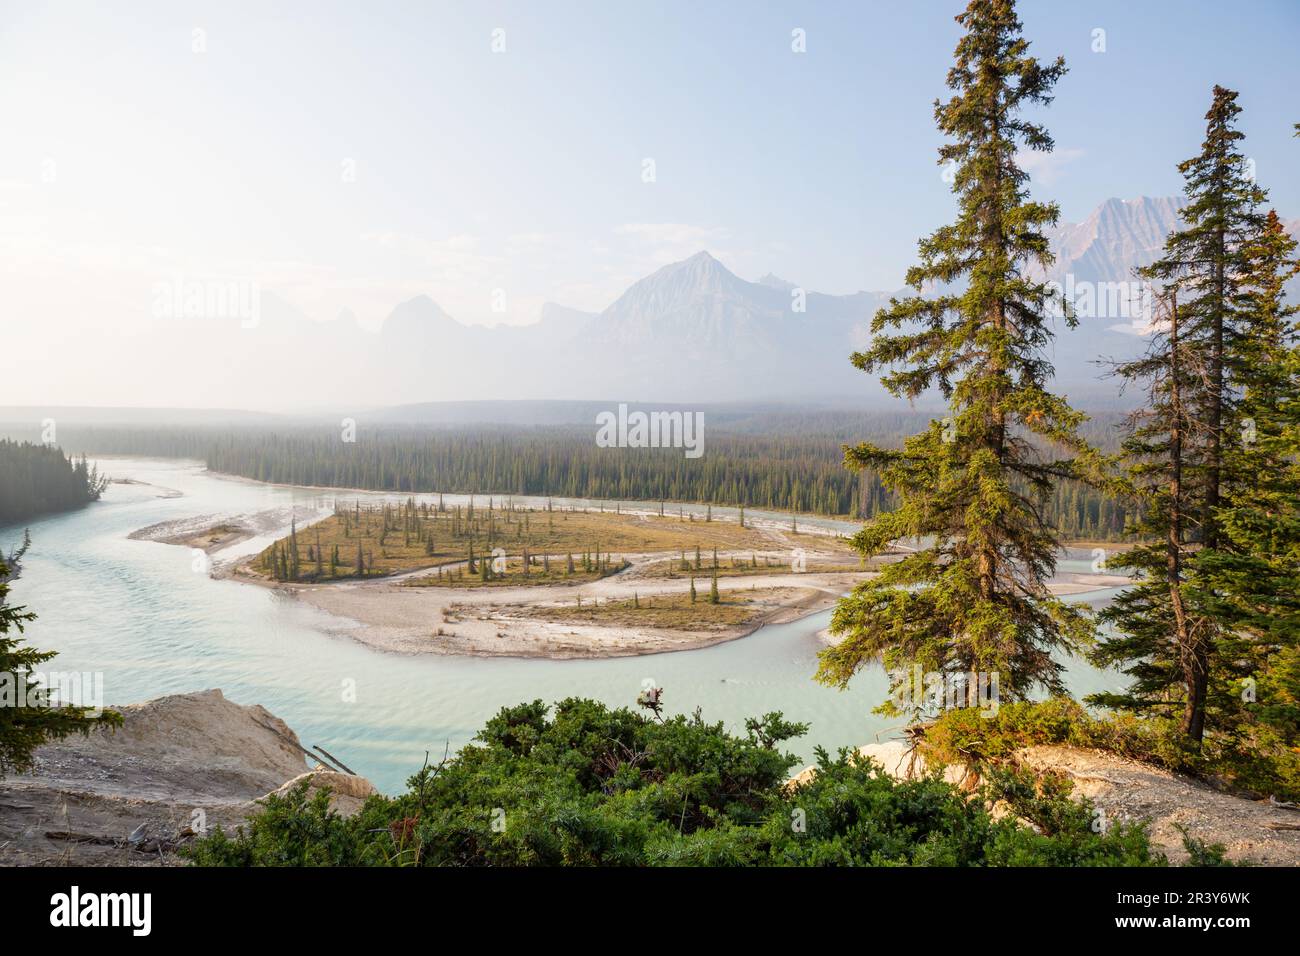 Picturesque mountain view in the Canadian Rockies in summer season Stock Photo